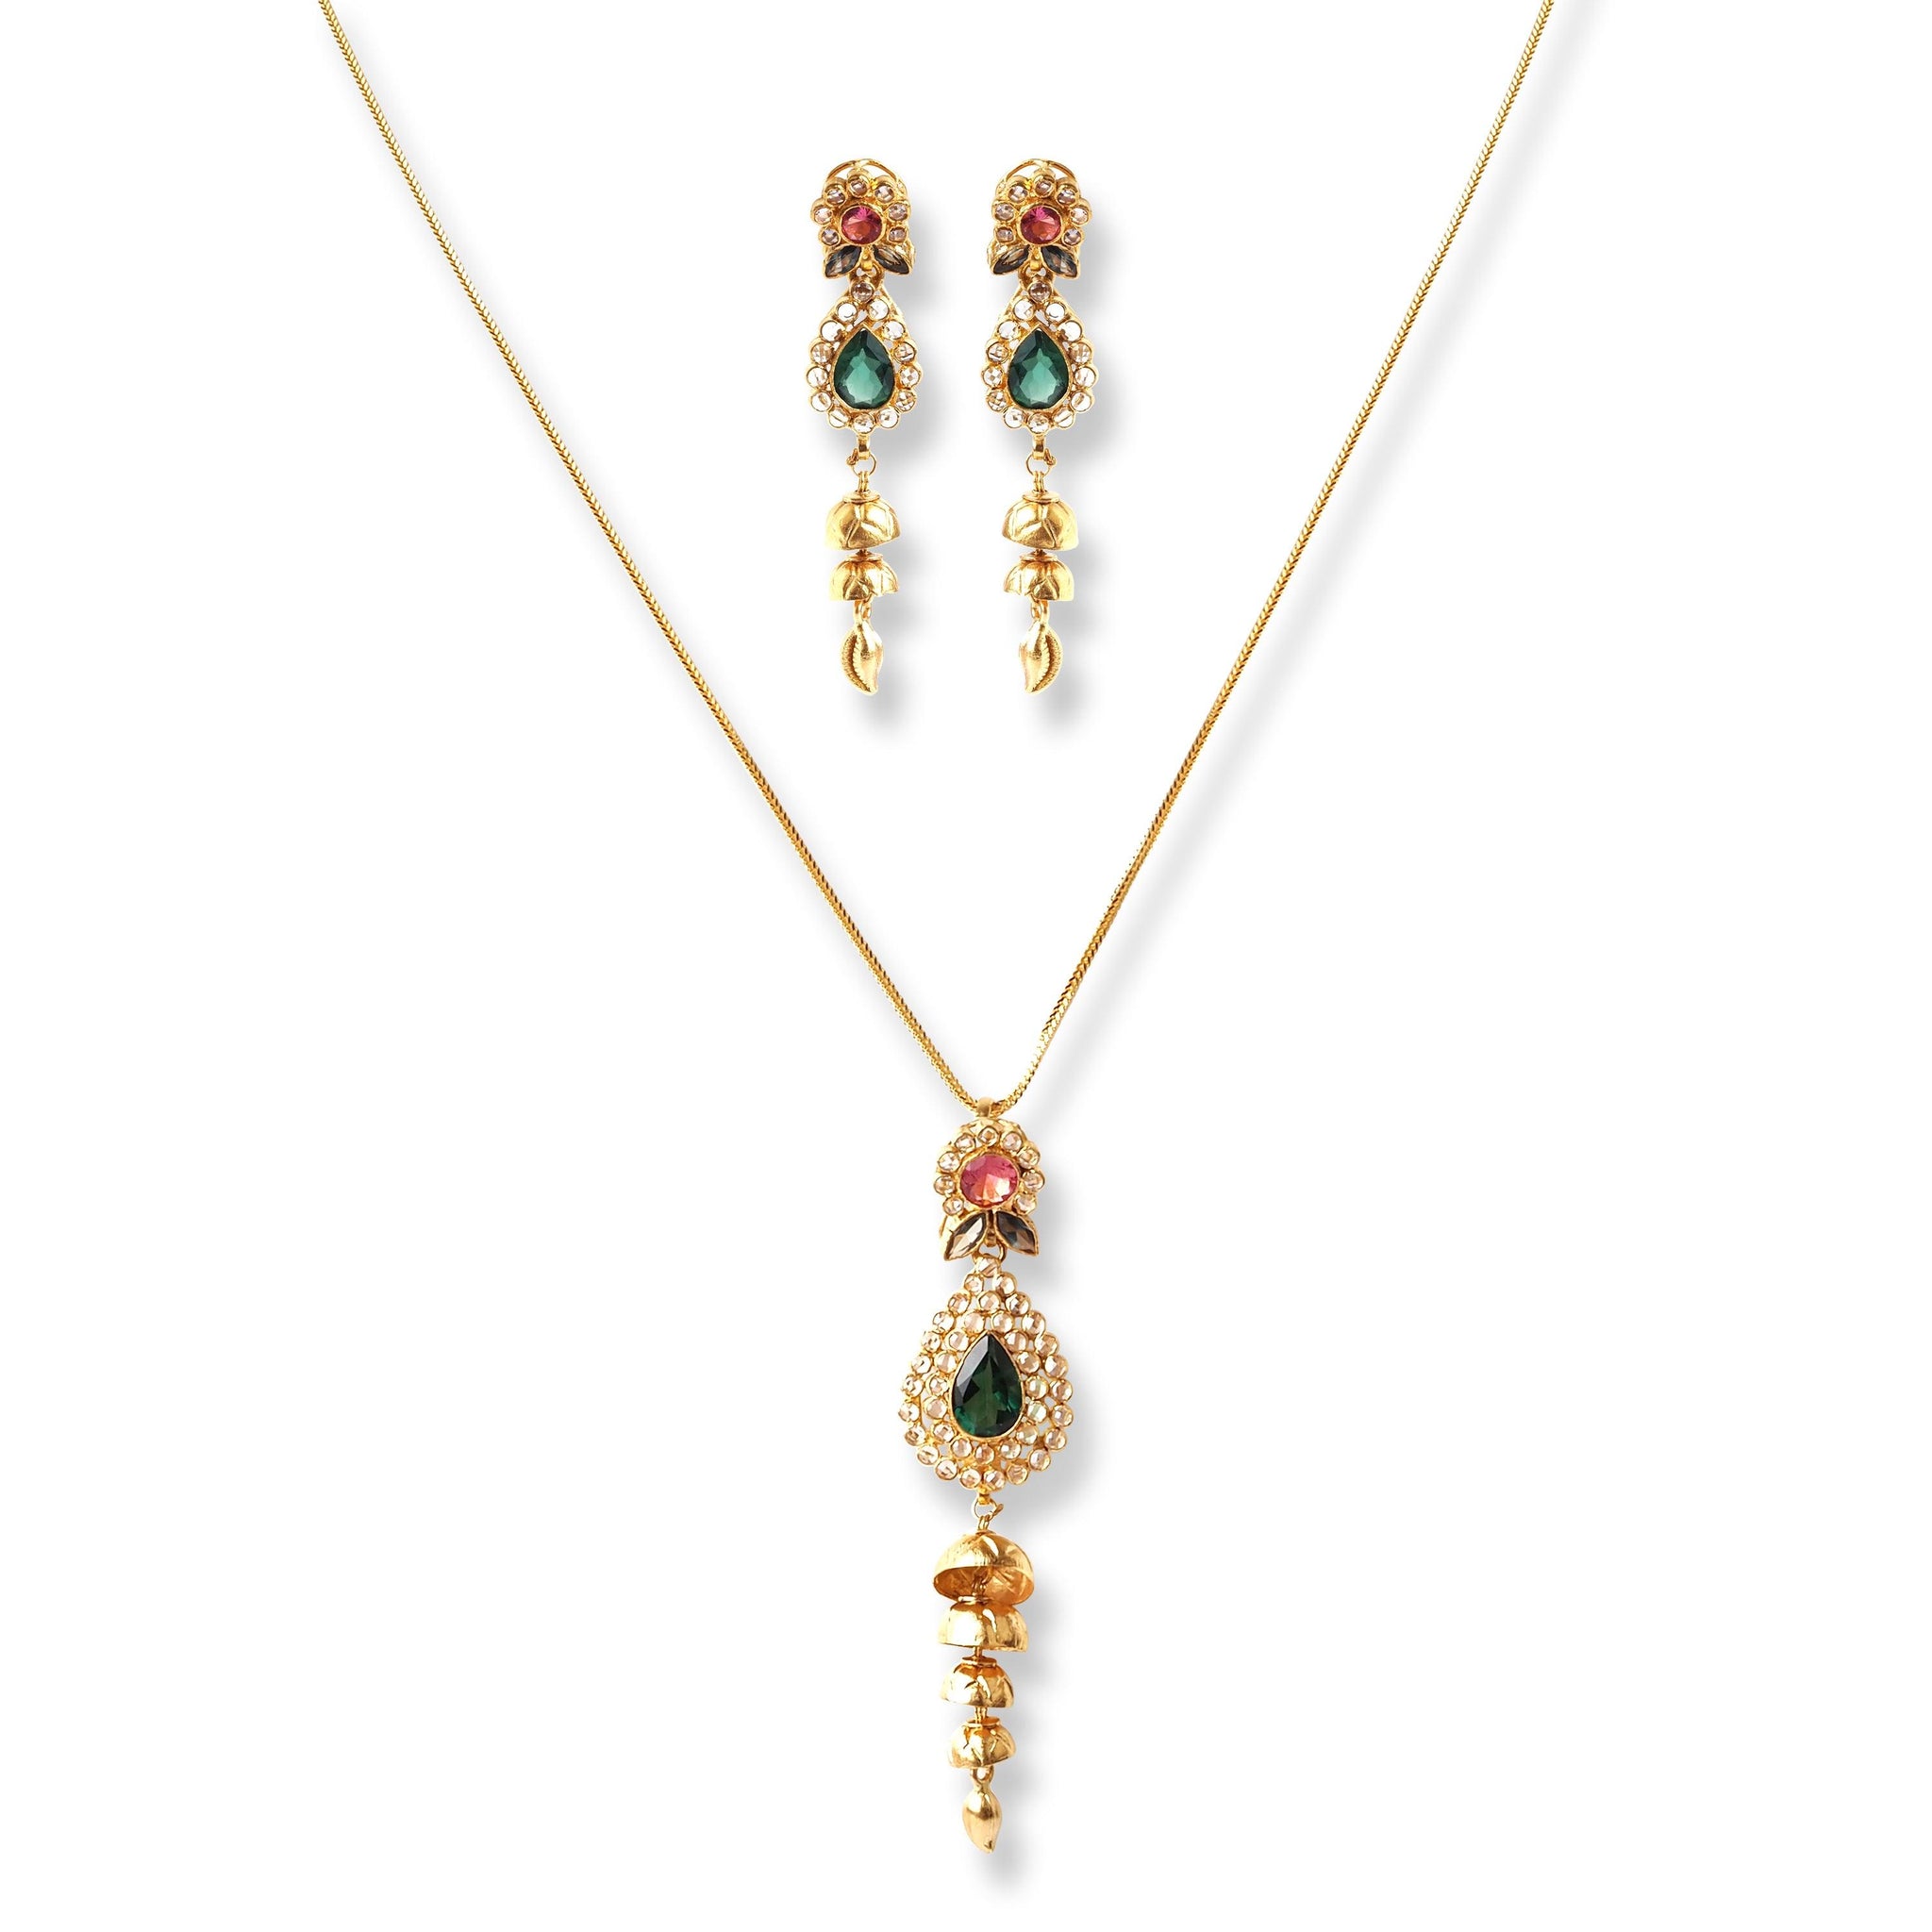 22ct Gold Set with Green, Pink & White Cubic Zirconia Stones (Pendant + Chain + Drop Earrings) (18.6g)